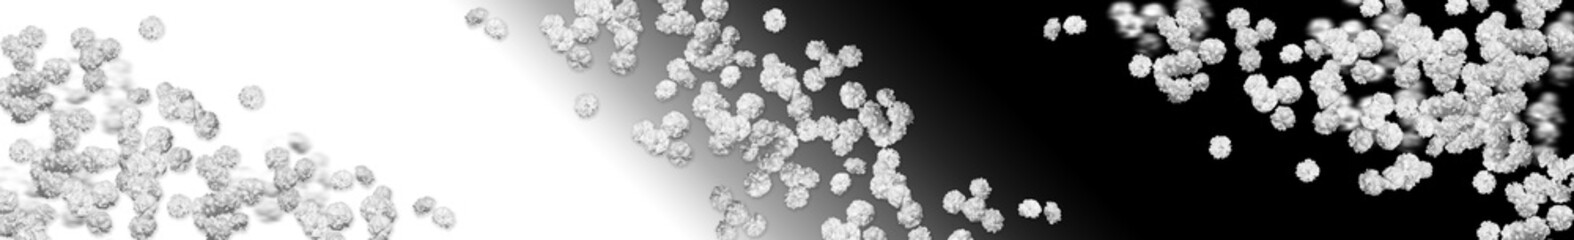 scattered flowers, many small white flowers scattered on a black and white gradient background. Panoramic image. Horizontal banner